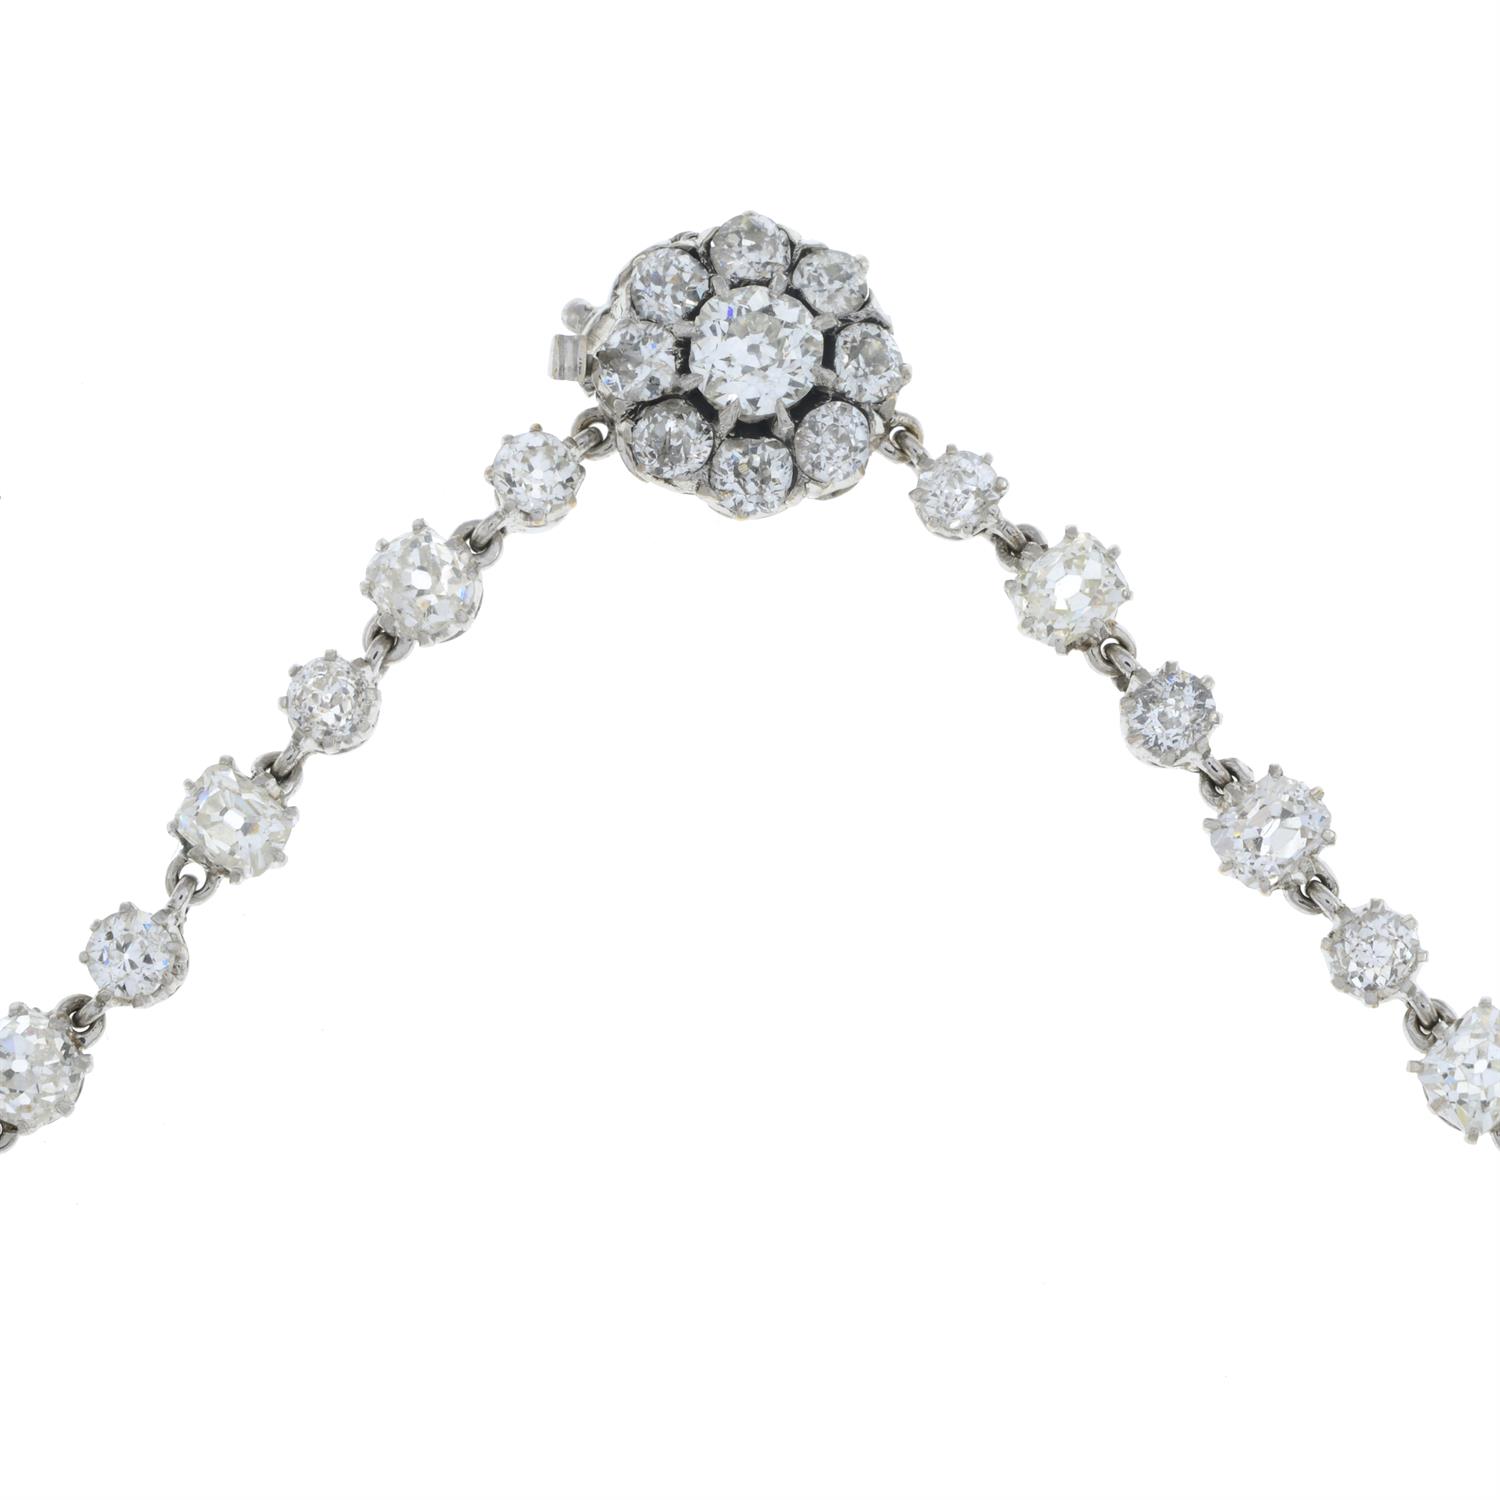 Early 20th century graduated diamond line necklace - Image 3 of 7